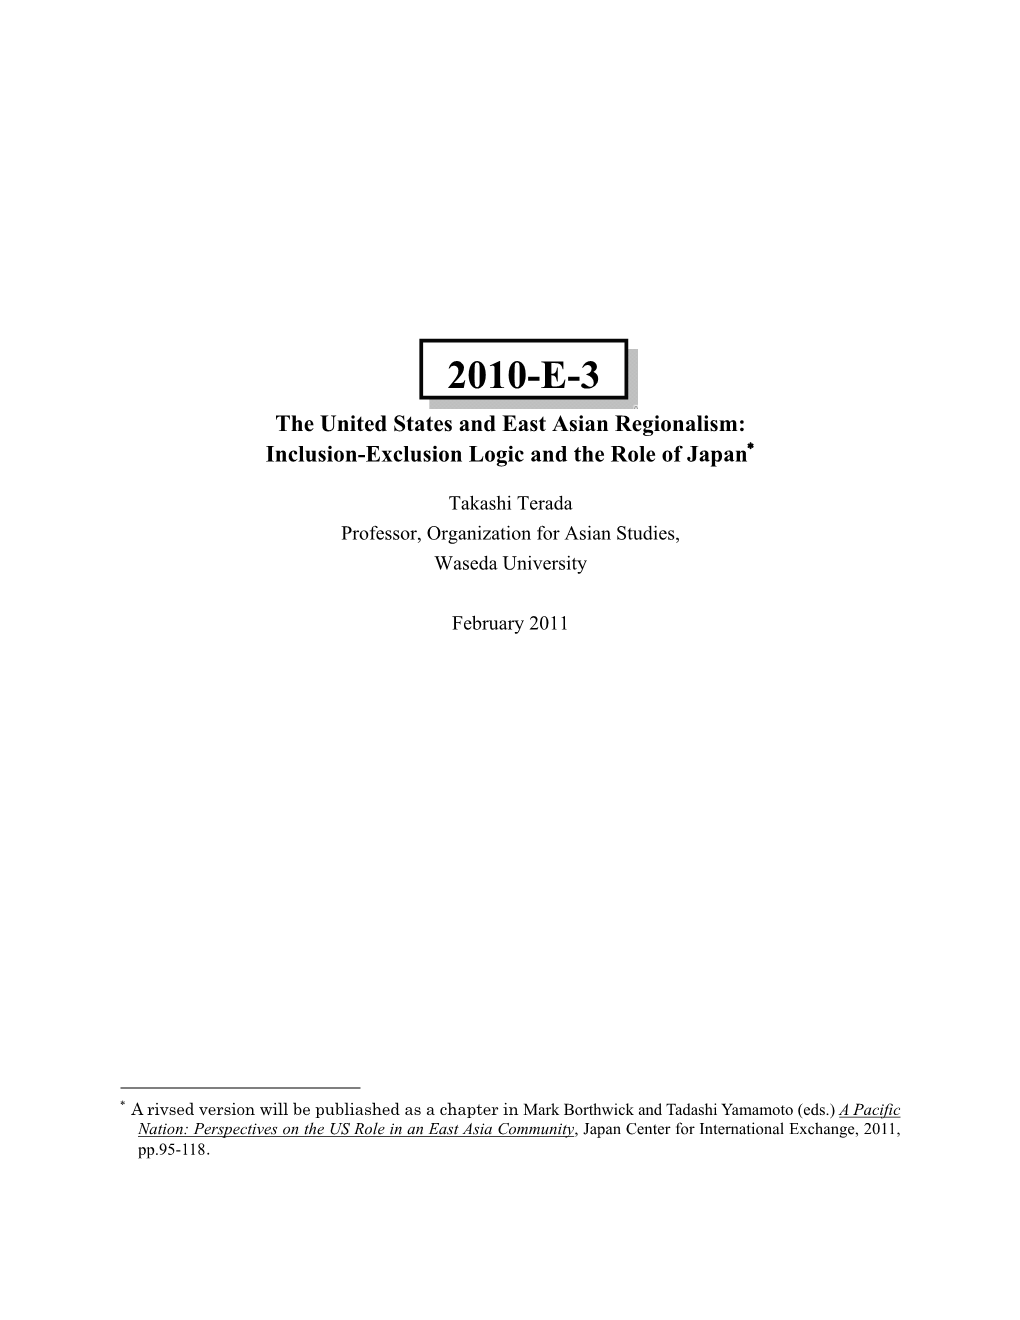 2010-E-3 the United States and East Asian Regionalism: Inclusion-Exclusion Logic and the Role of Japan